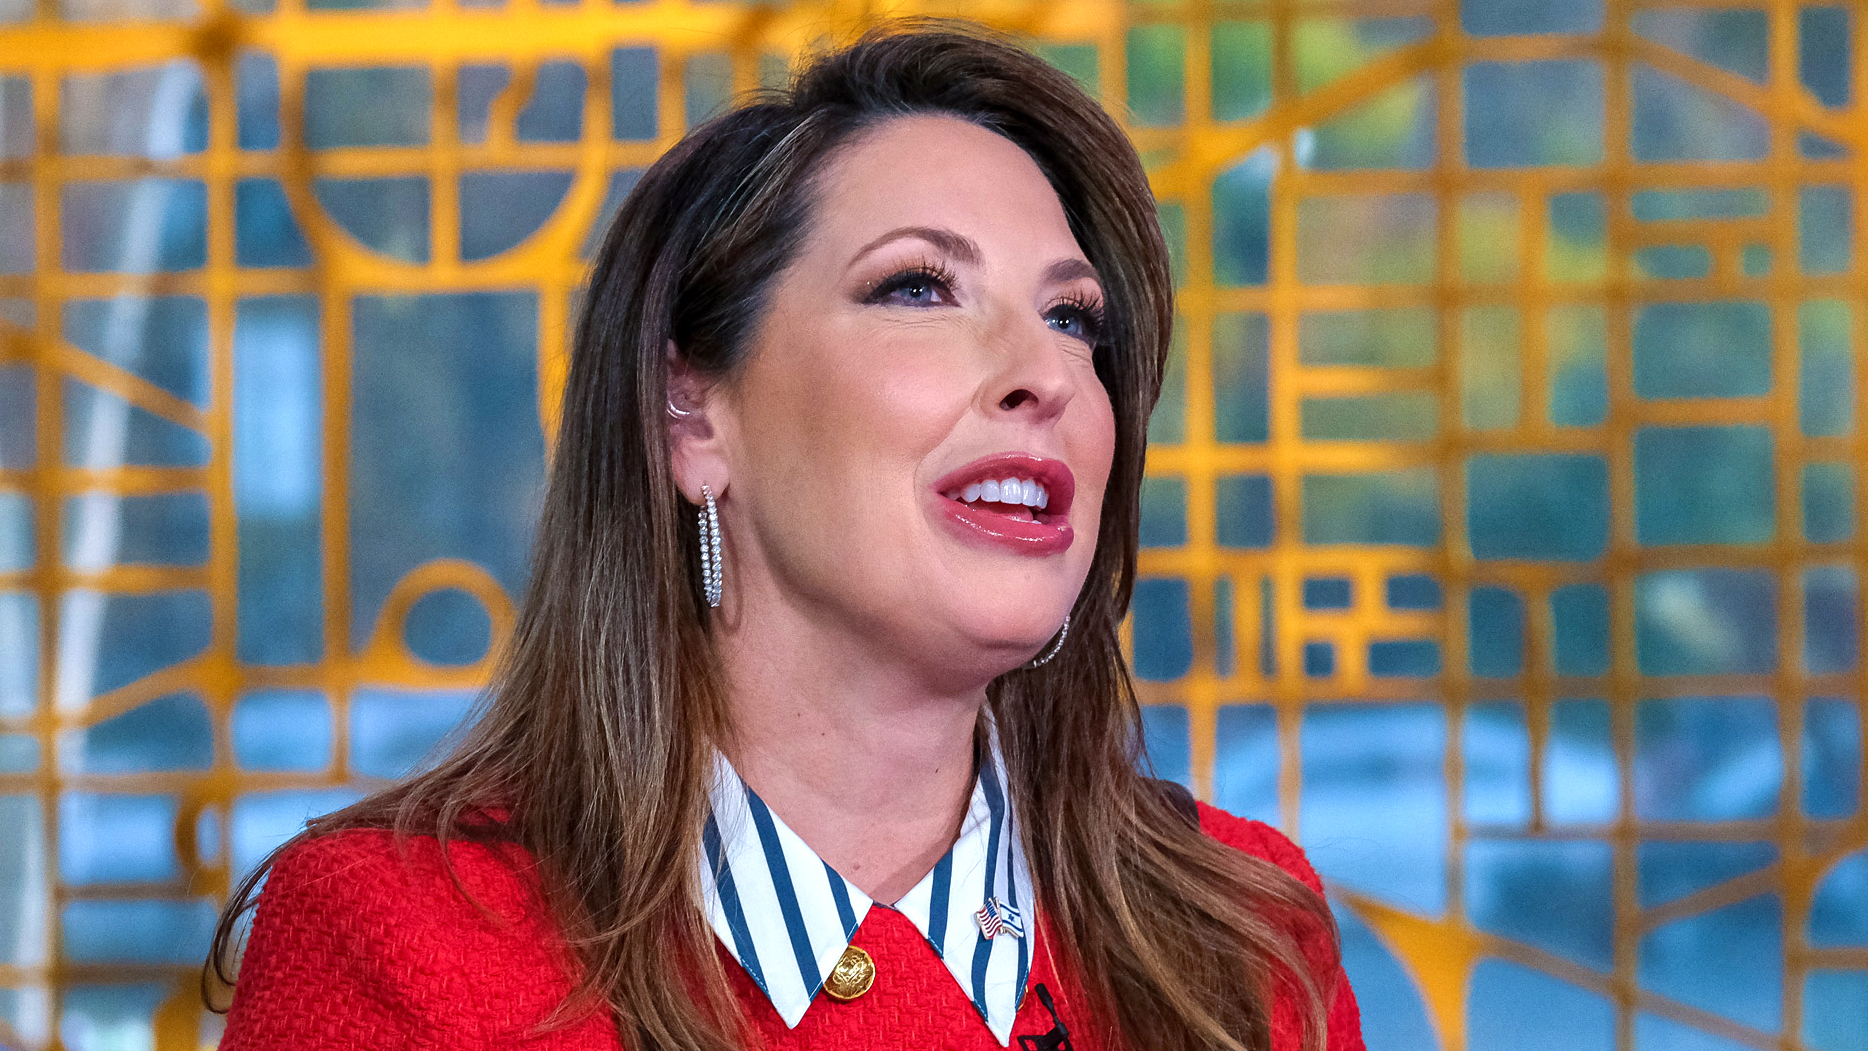 NBC News reportedly plans to dismiss former RNC Chair Ronna McDaniel following a rebellion by on-air hosts